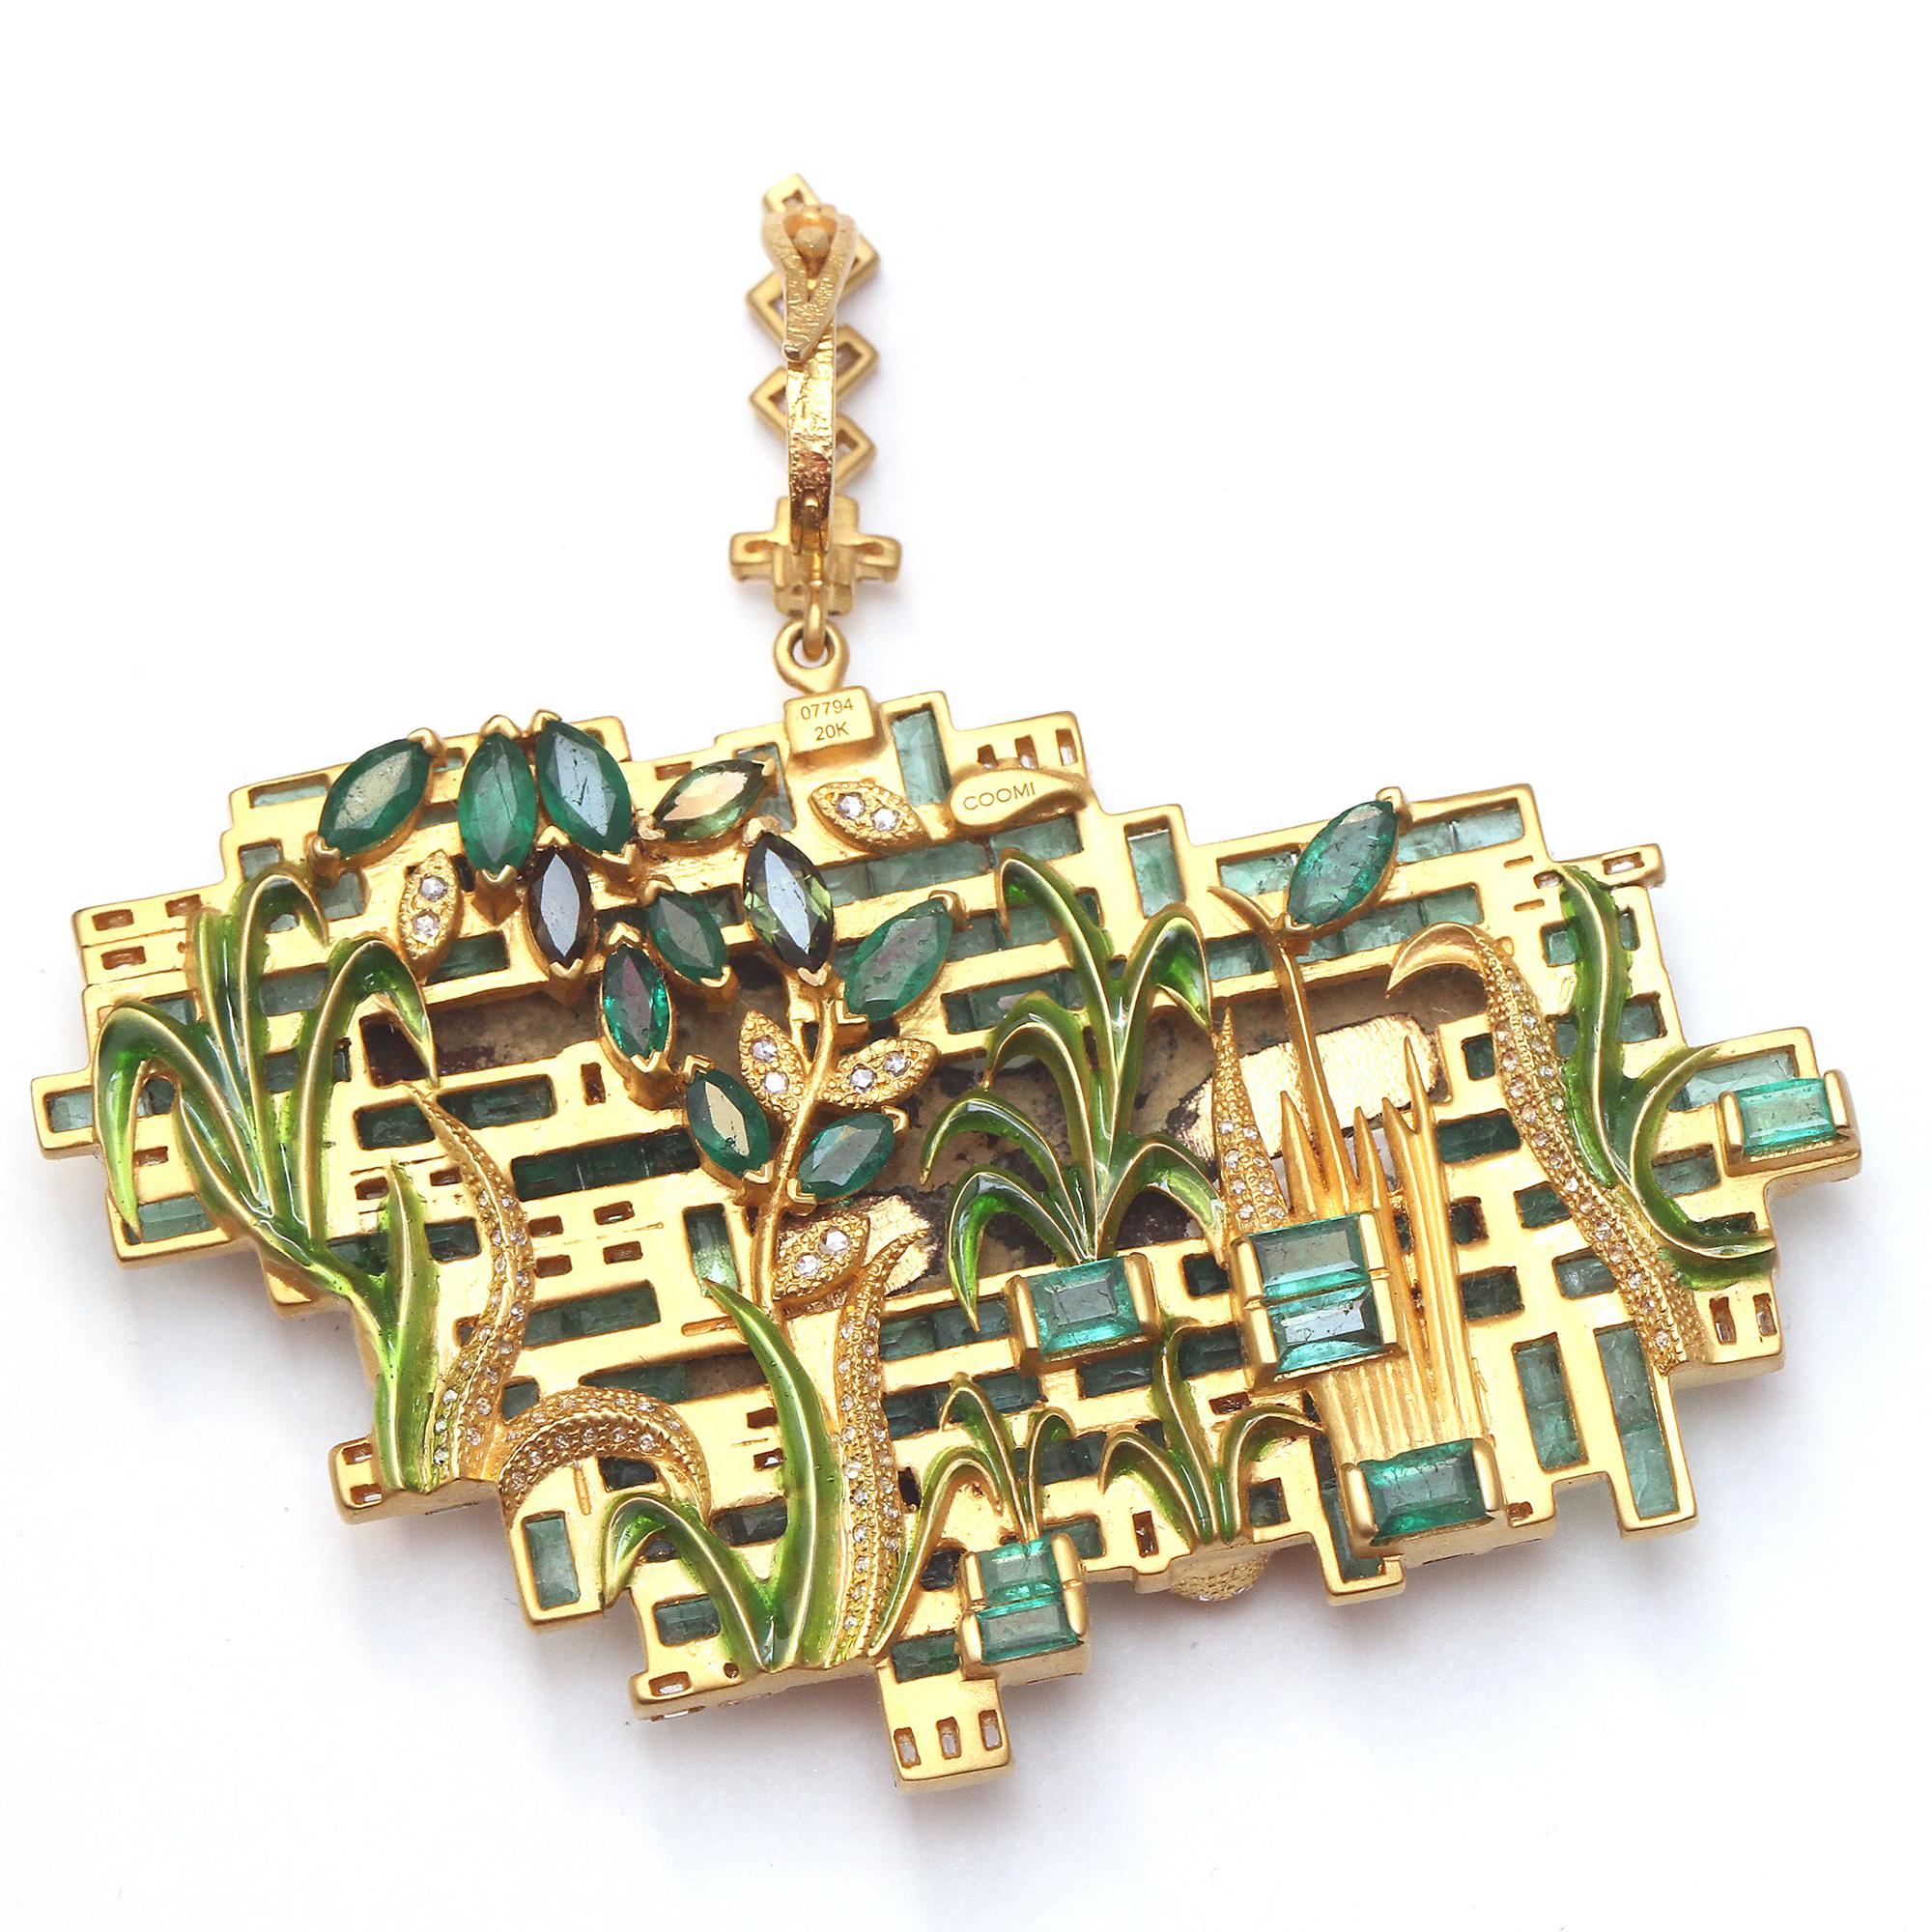 Coomi Antiquity pendant set in 20K yellow gold featuring a Roman bronze horse brooch, c. 2nd - 3rd Century AD, with 13.25cts emerald, 1.61cts diamond, and 0.83cts green tourmaline.

Before human beings created alphabets or forged written words, art